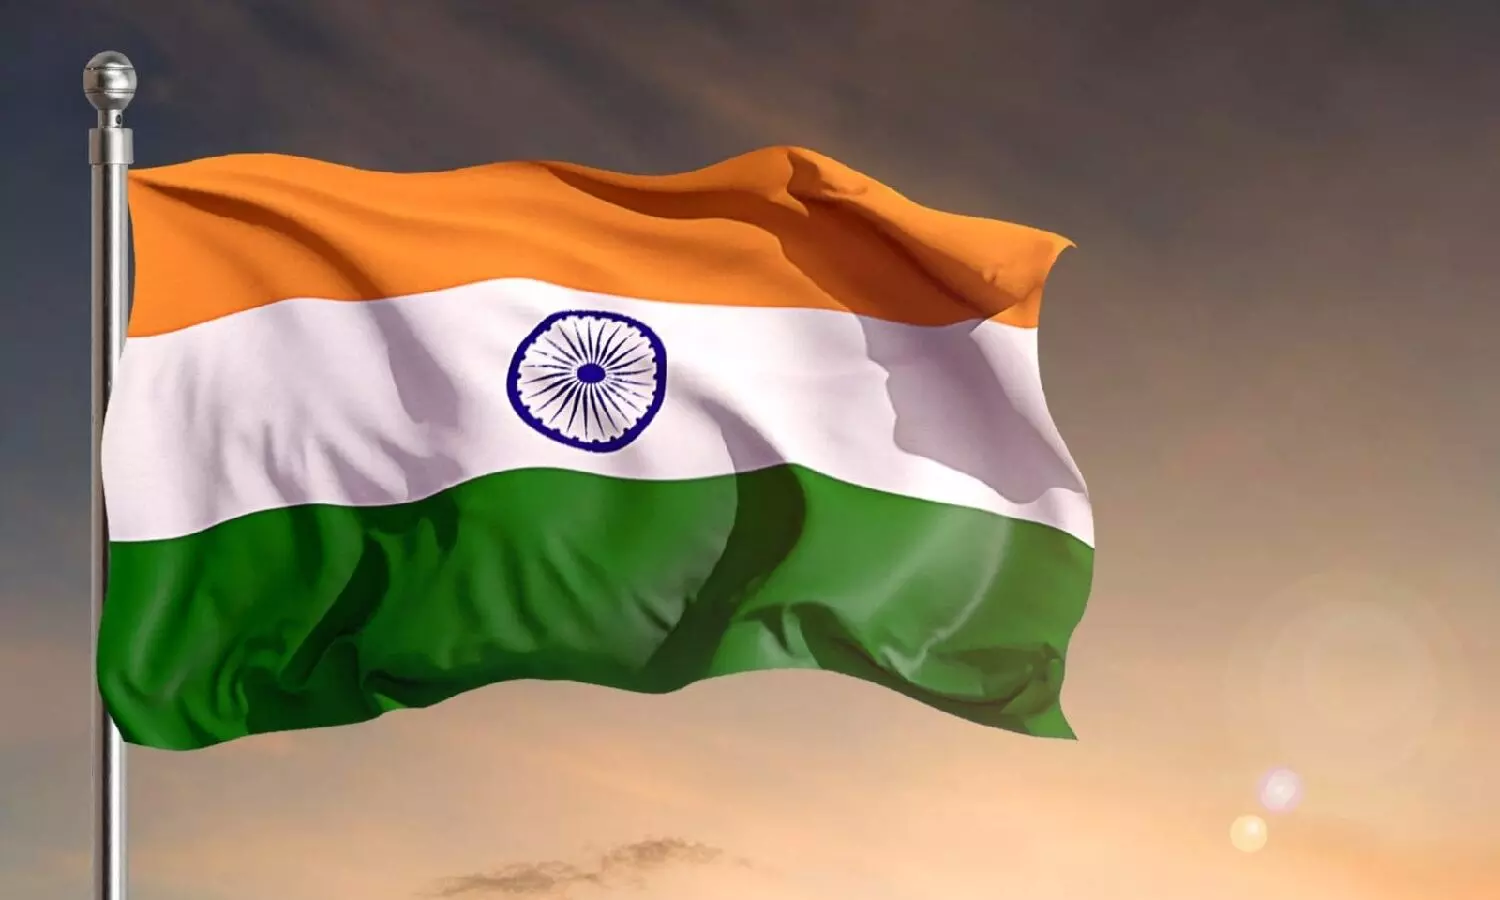 National flag in India